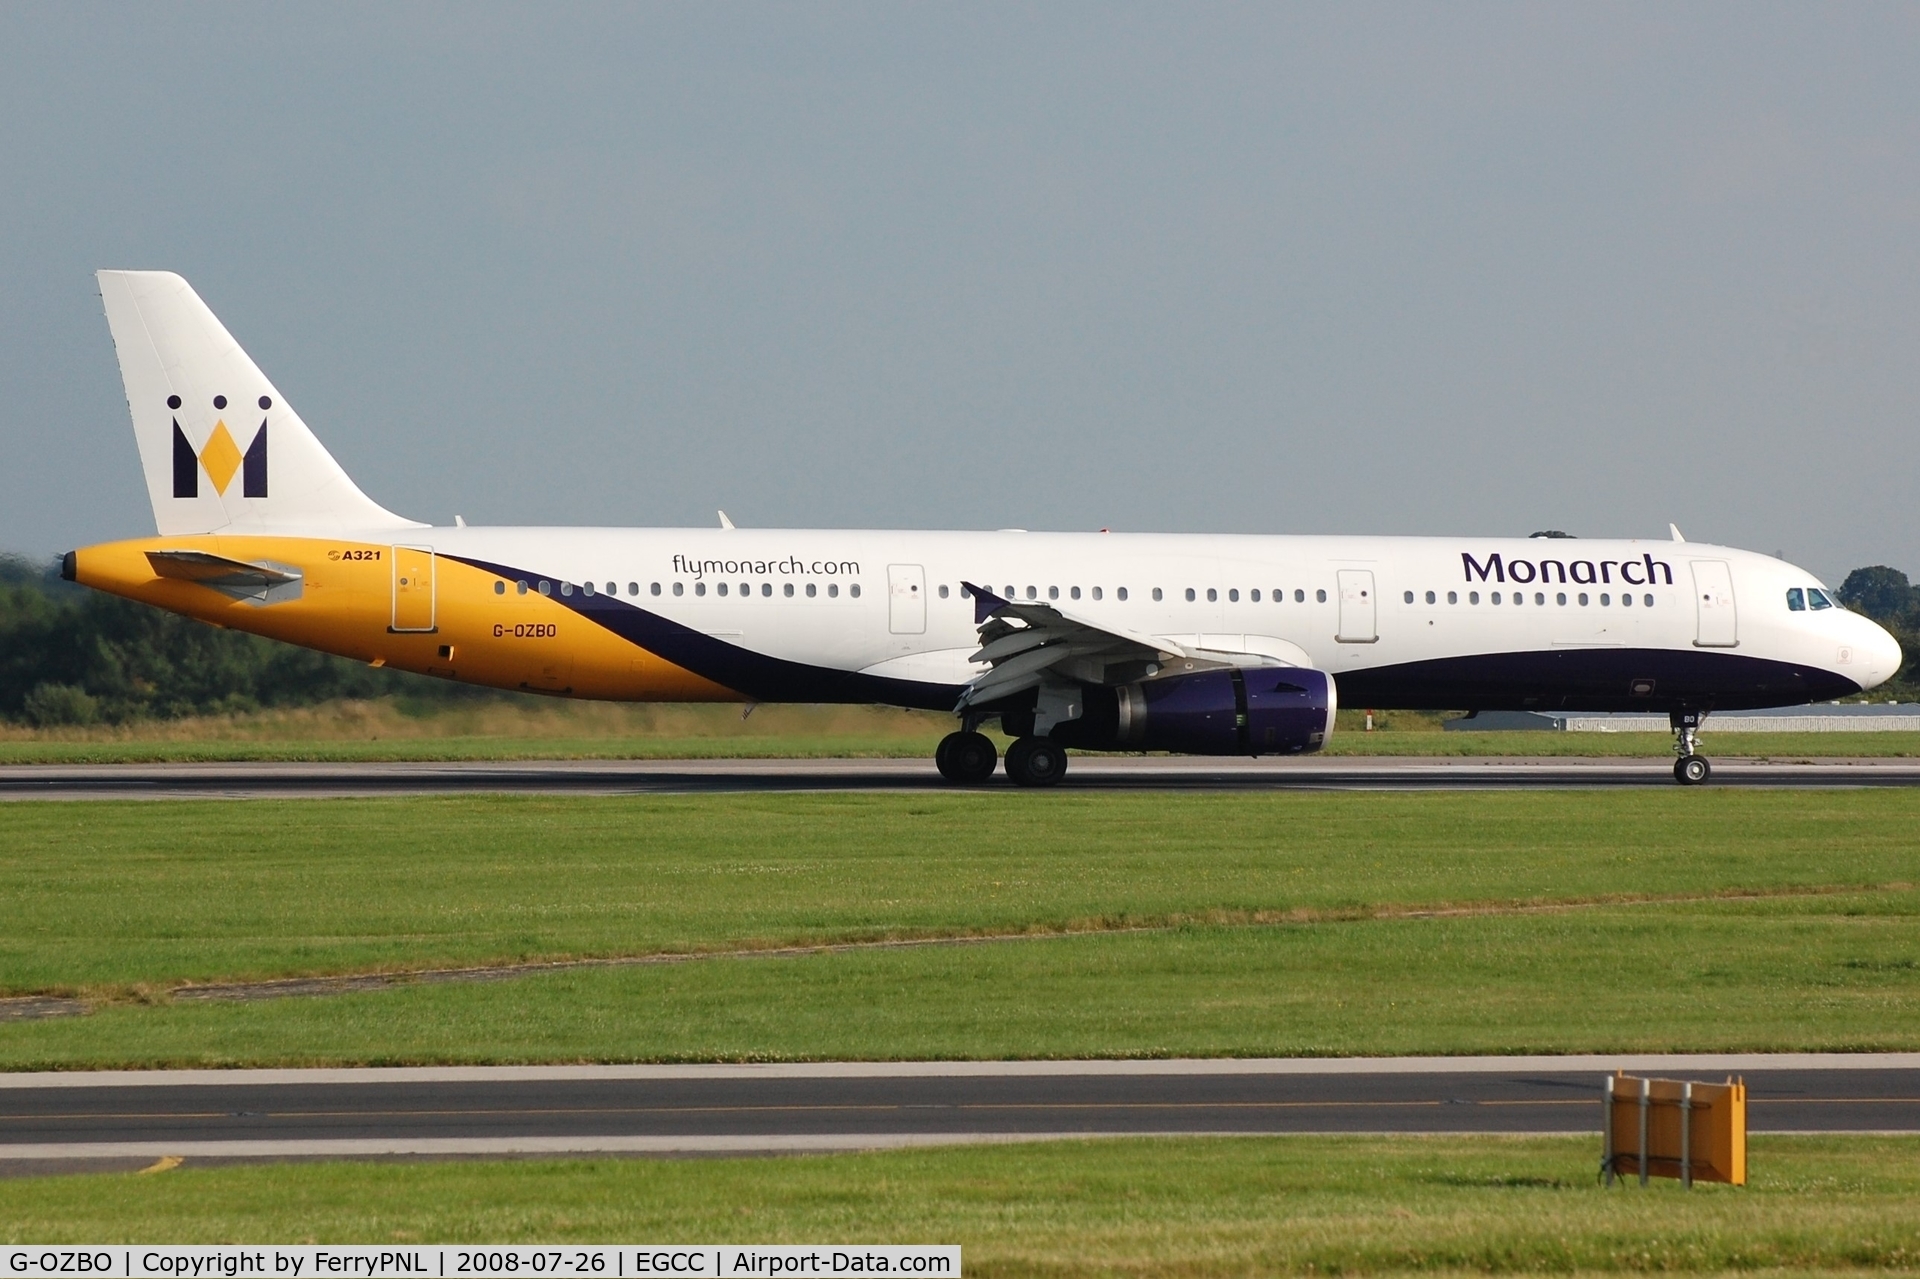 G-OZBO, 2000 Airbus A321-231 C/N 1207, Arrival A321 of Monarch A321